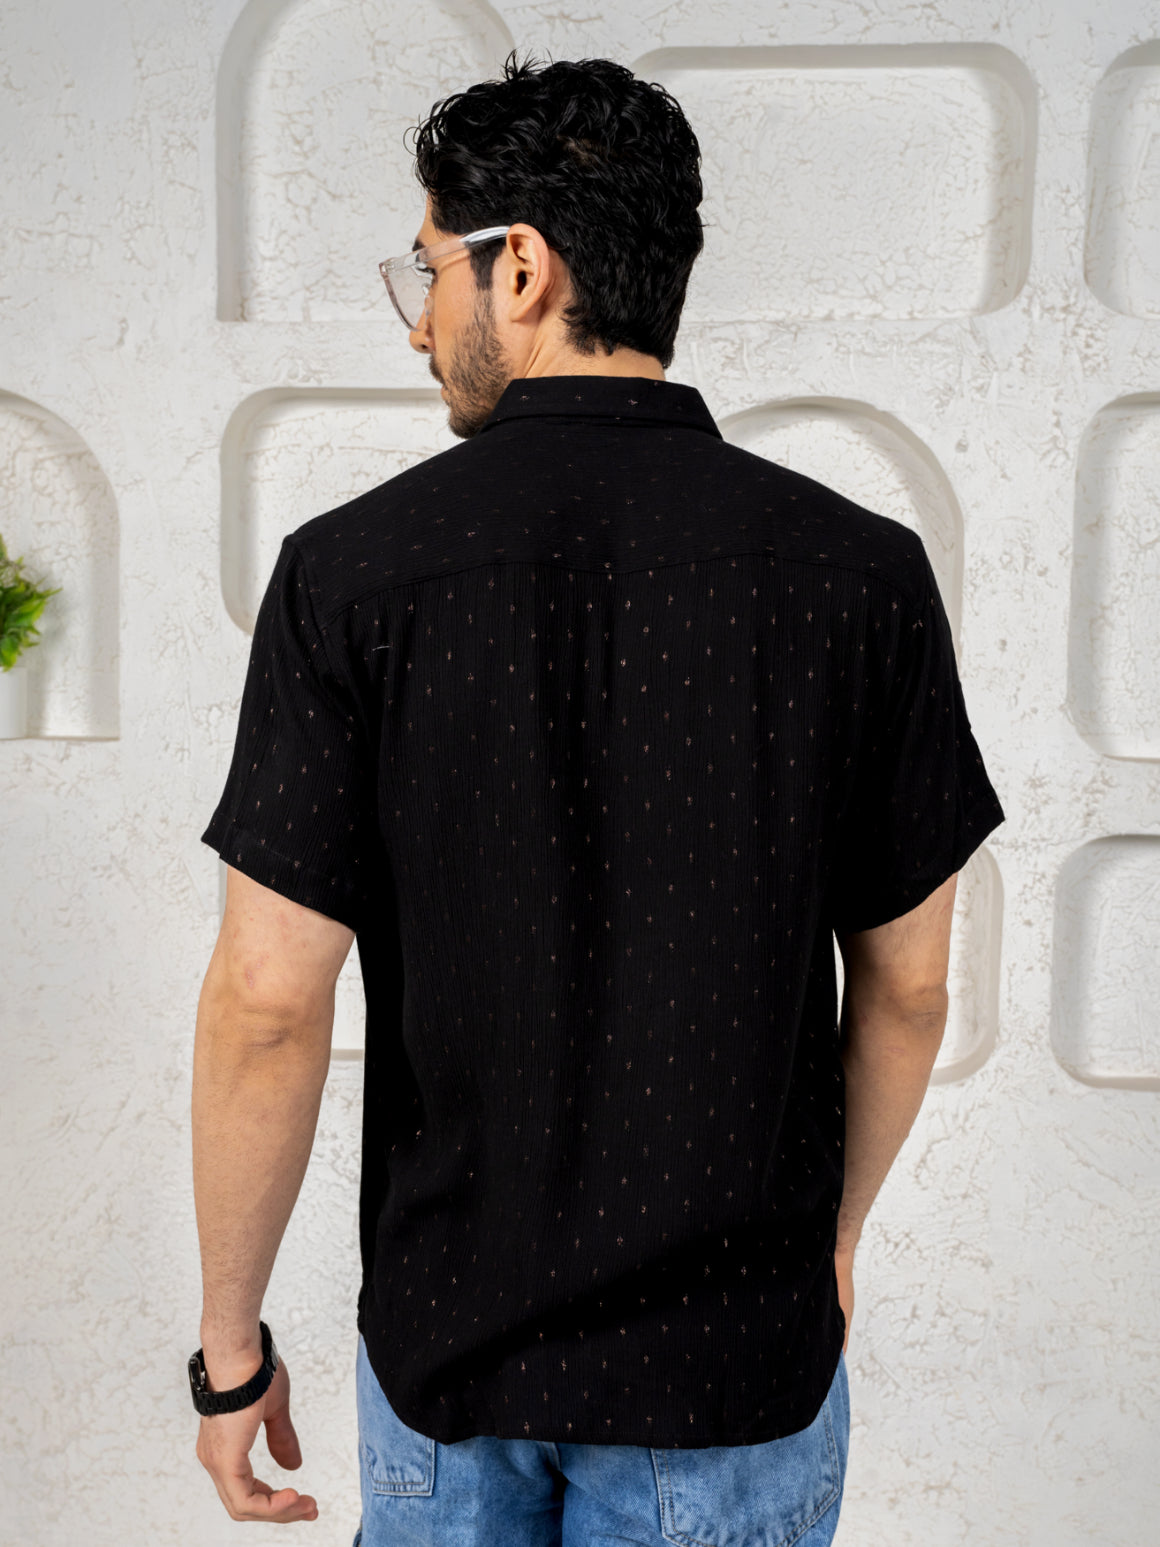 Firangi Yarn Relaxed Fit Super Flowy Re-engineered Cotton Lurex Polka- Half Sleeves Party Shirt Black Copper